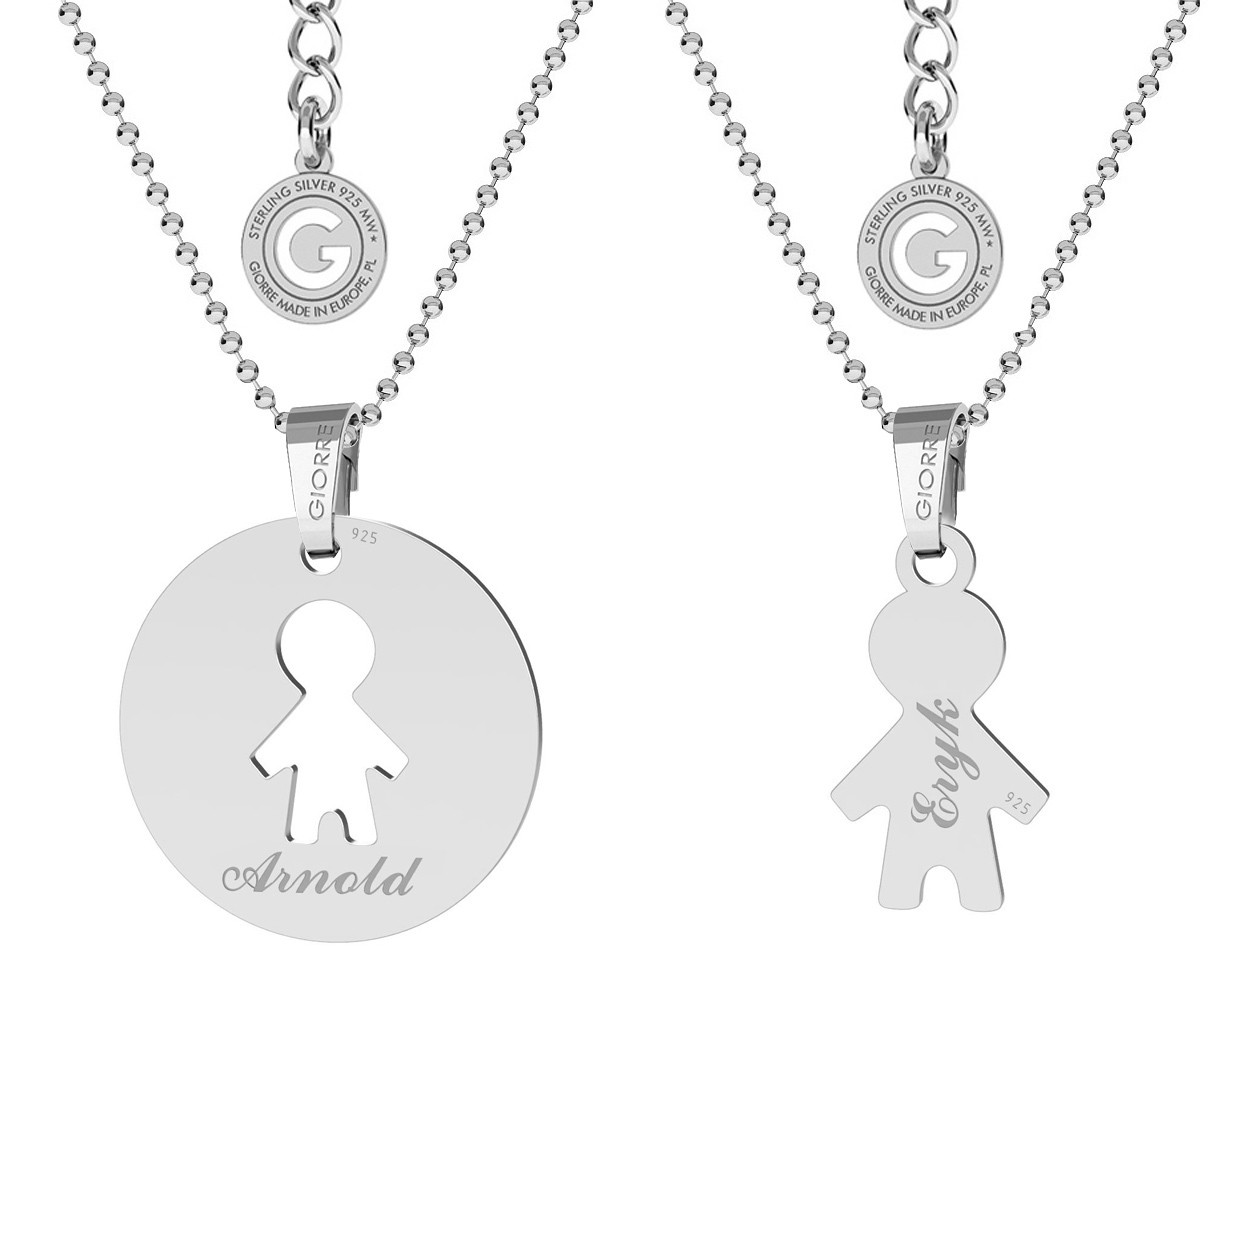 VITAMIN C CHEMICAL FORMULA CHARMS, STERLING SILVER 925